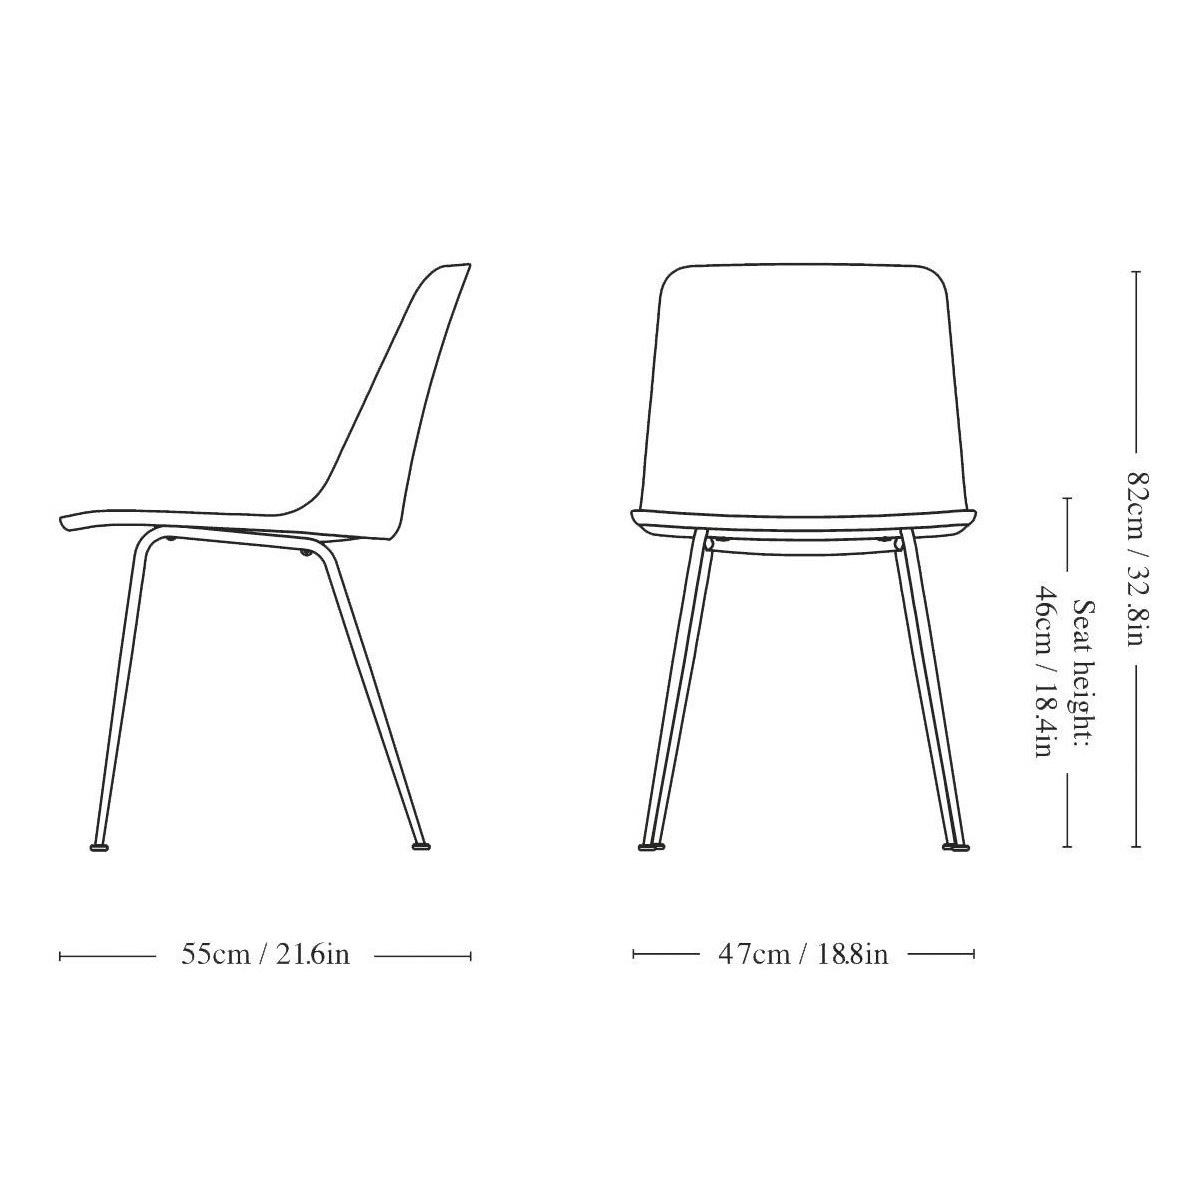 Rely chair HW8 – Re-wool 378 – set of 4